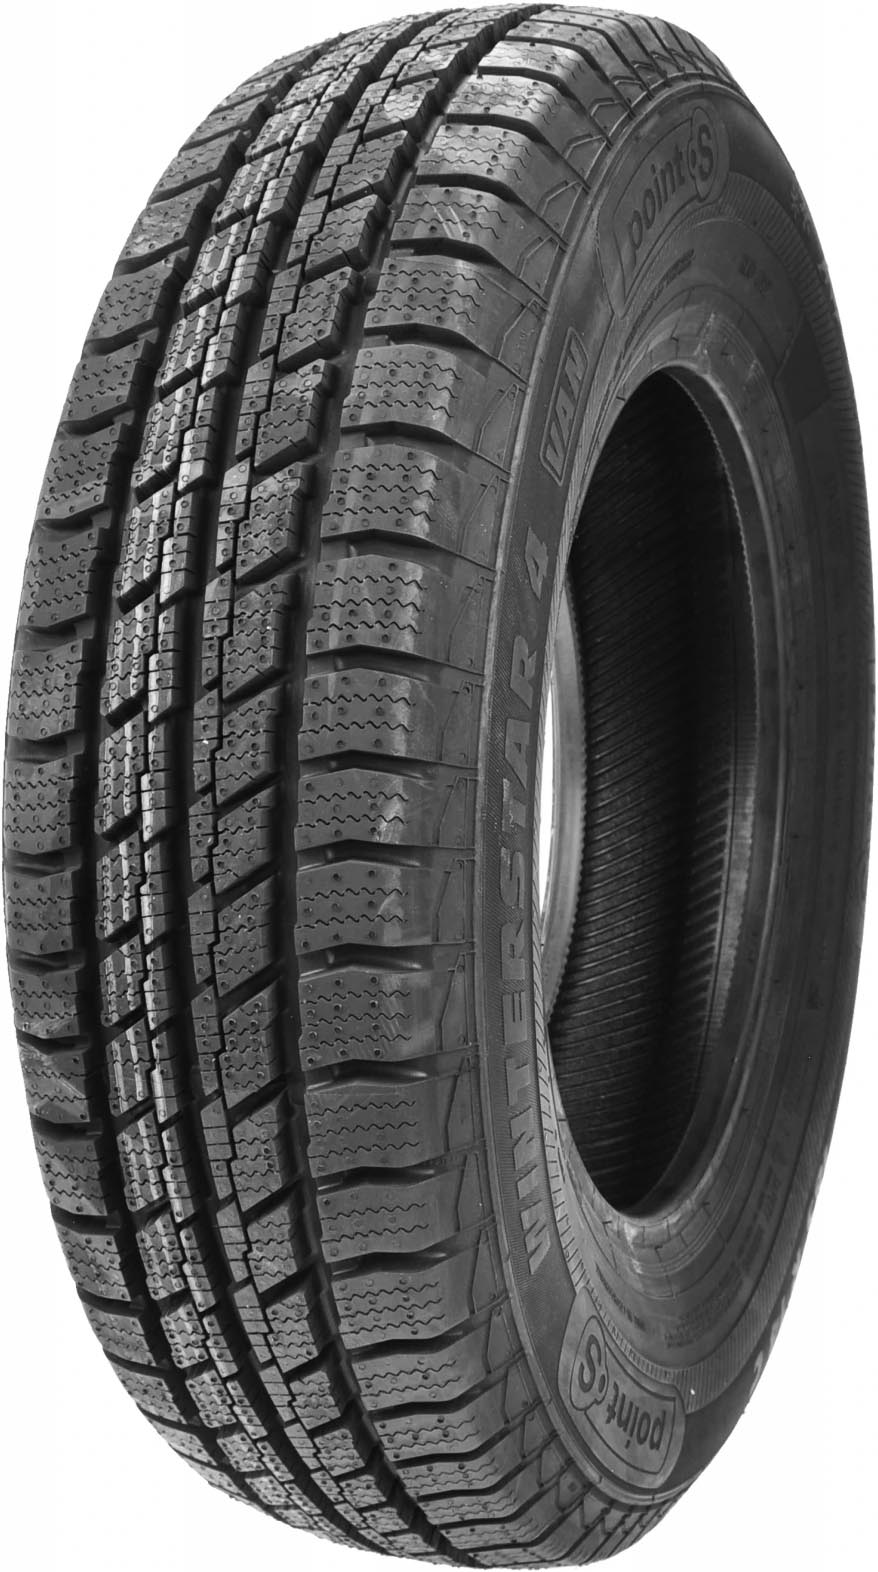 Anvelope microbuz POINT S 235/65 R16 115R